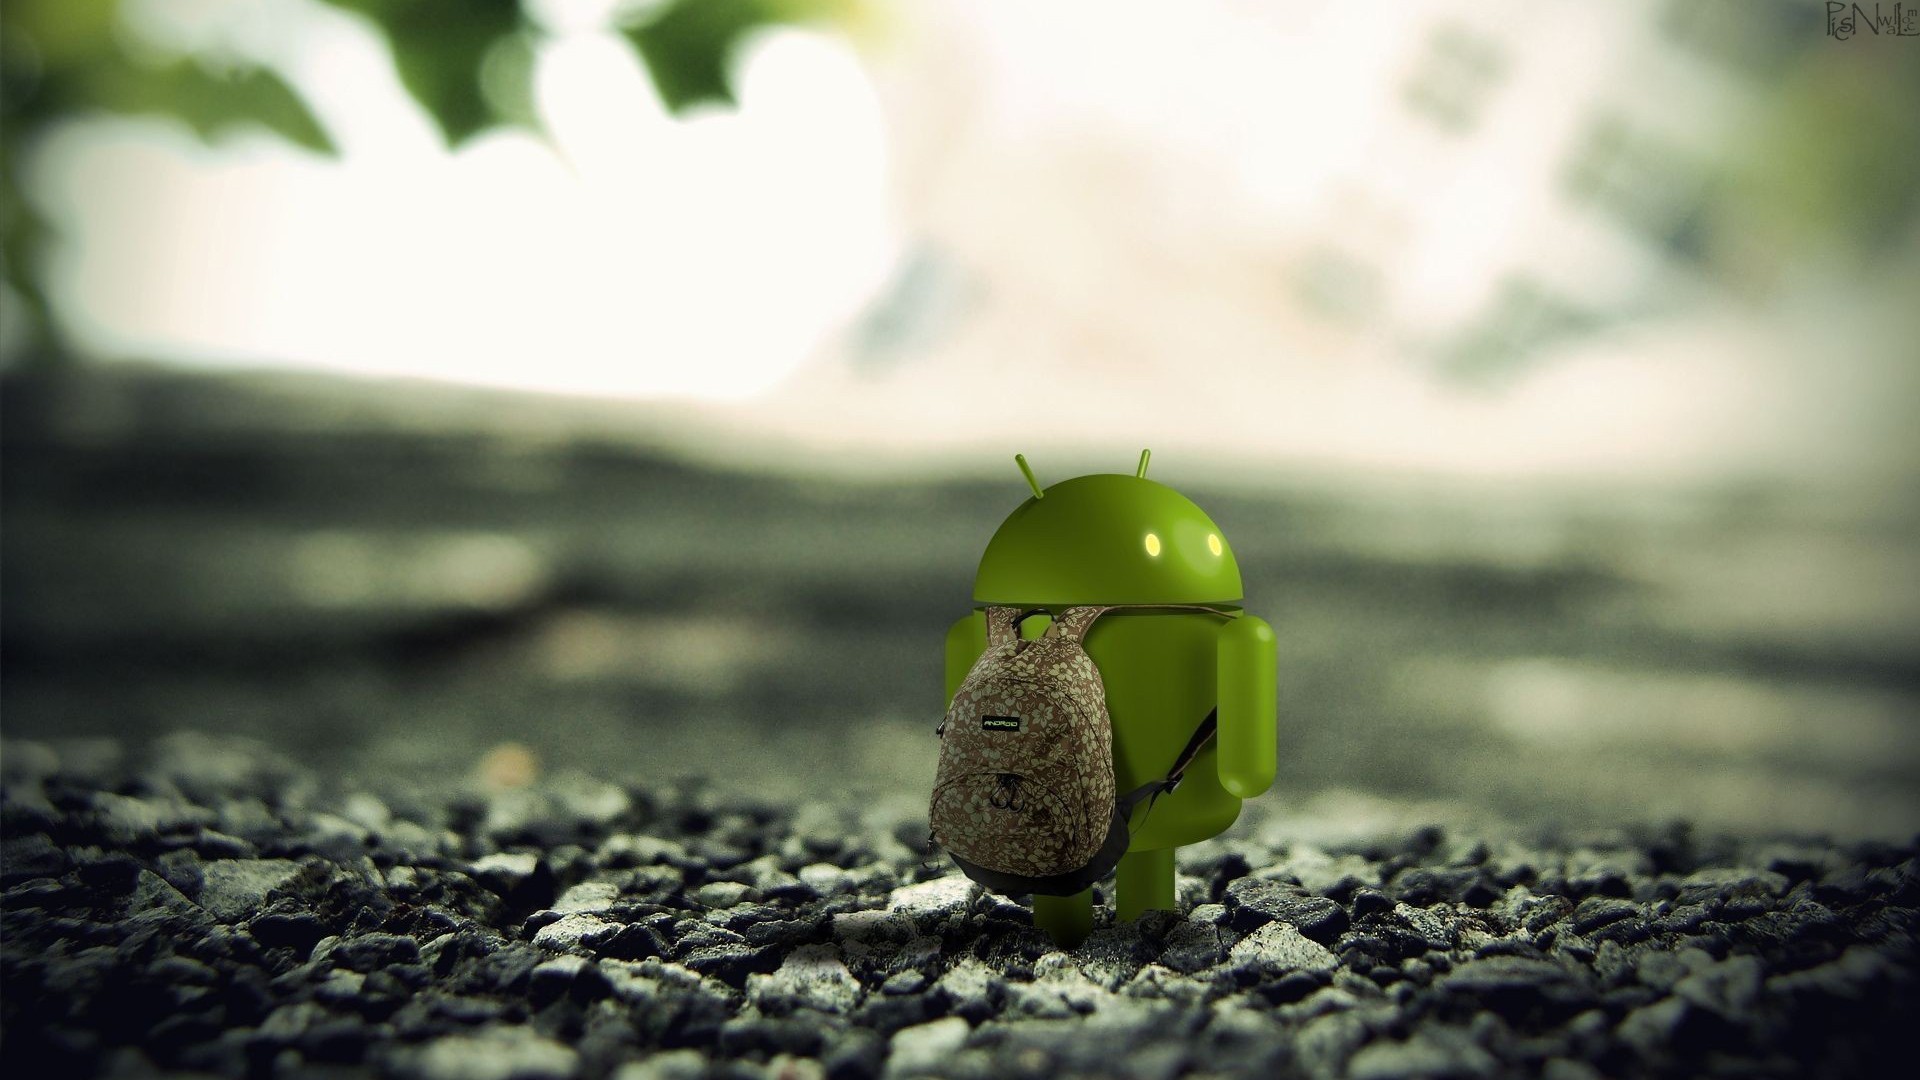 Wallpapers-HD-Android-for-PC | Latest Free Wallpapers Including HD ...